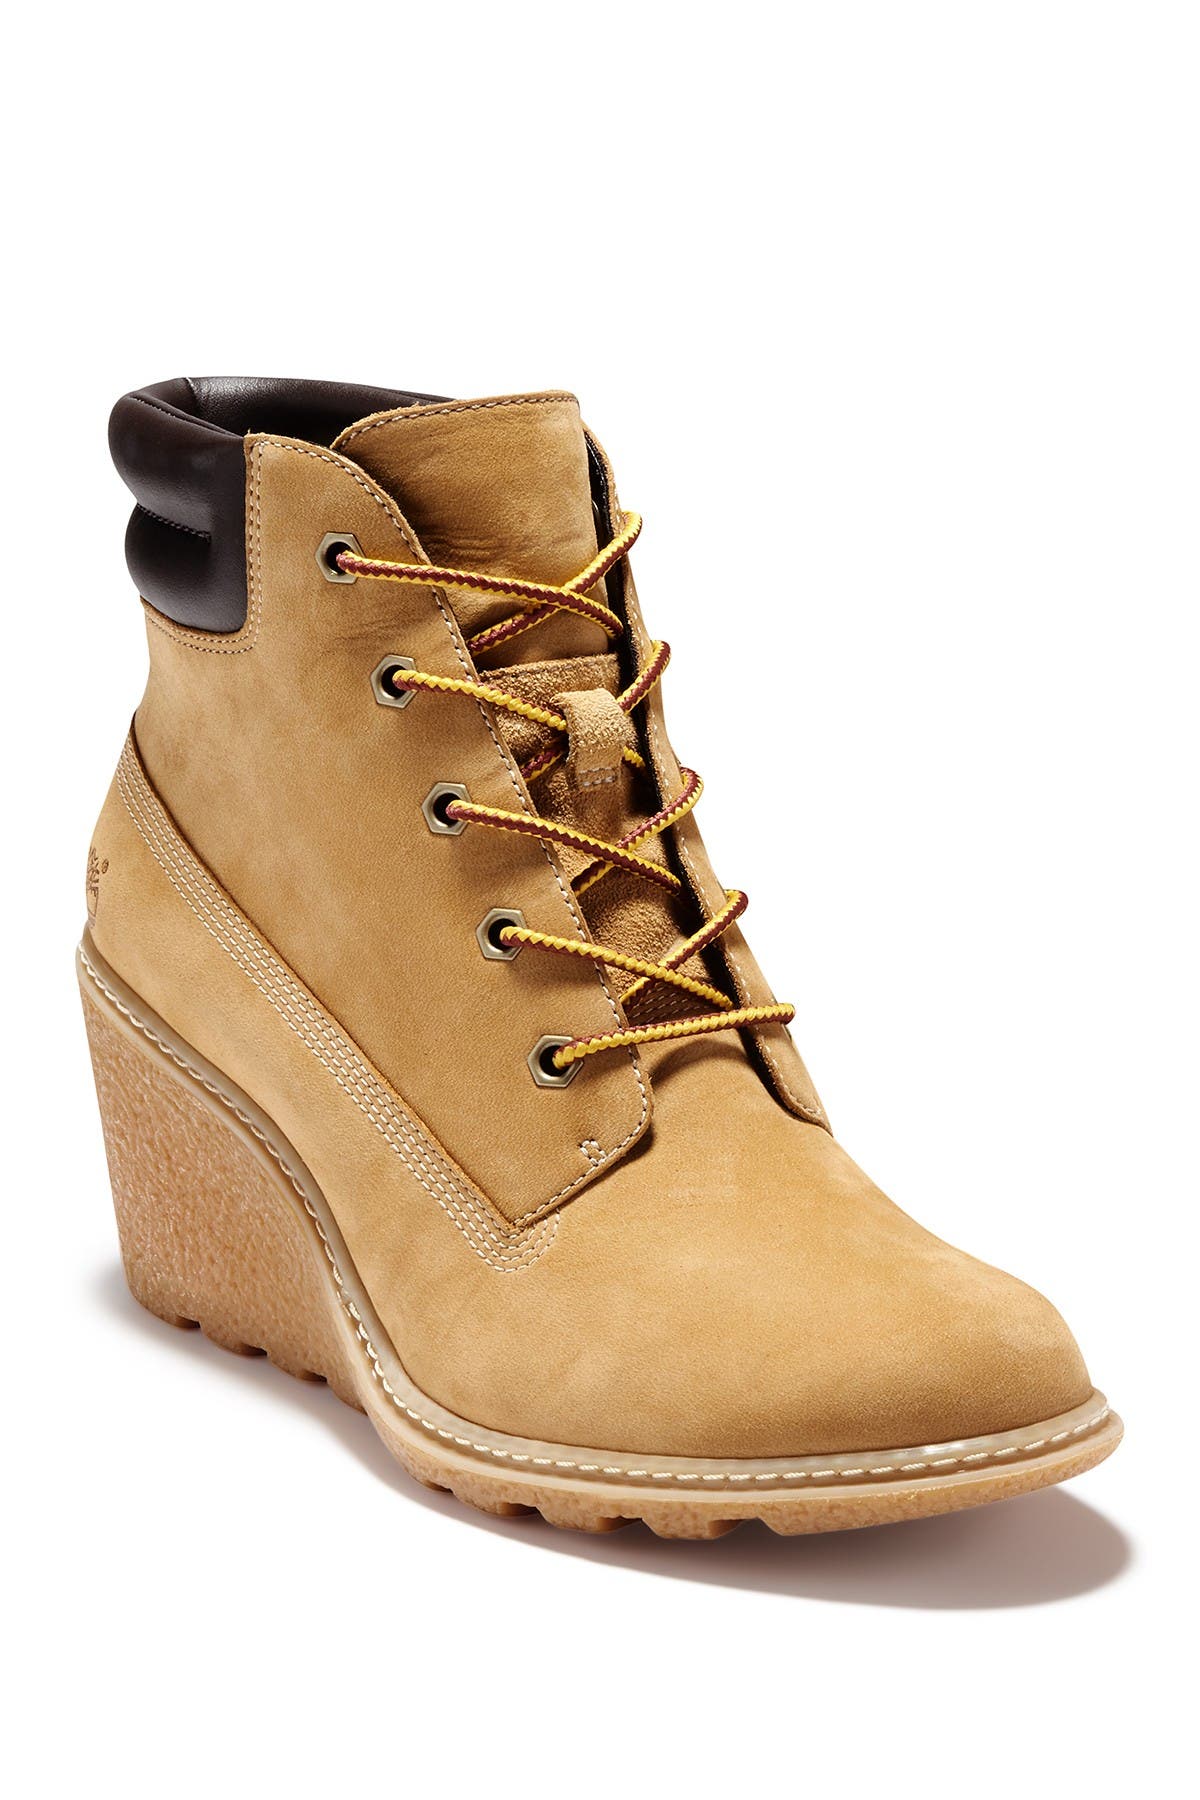 womens timberland boots nordstrom rack